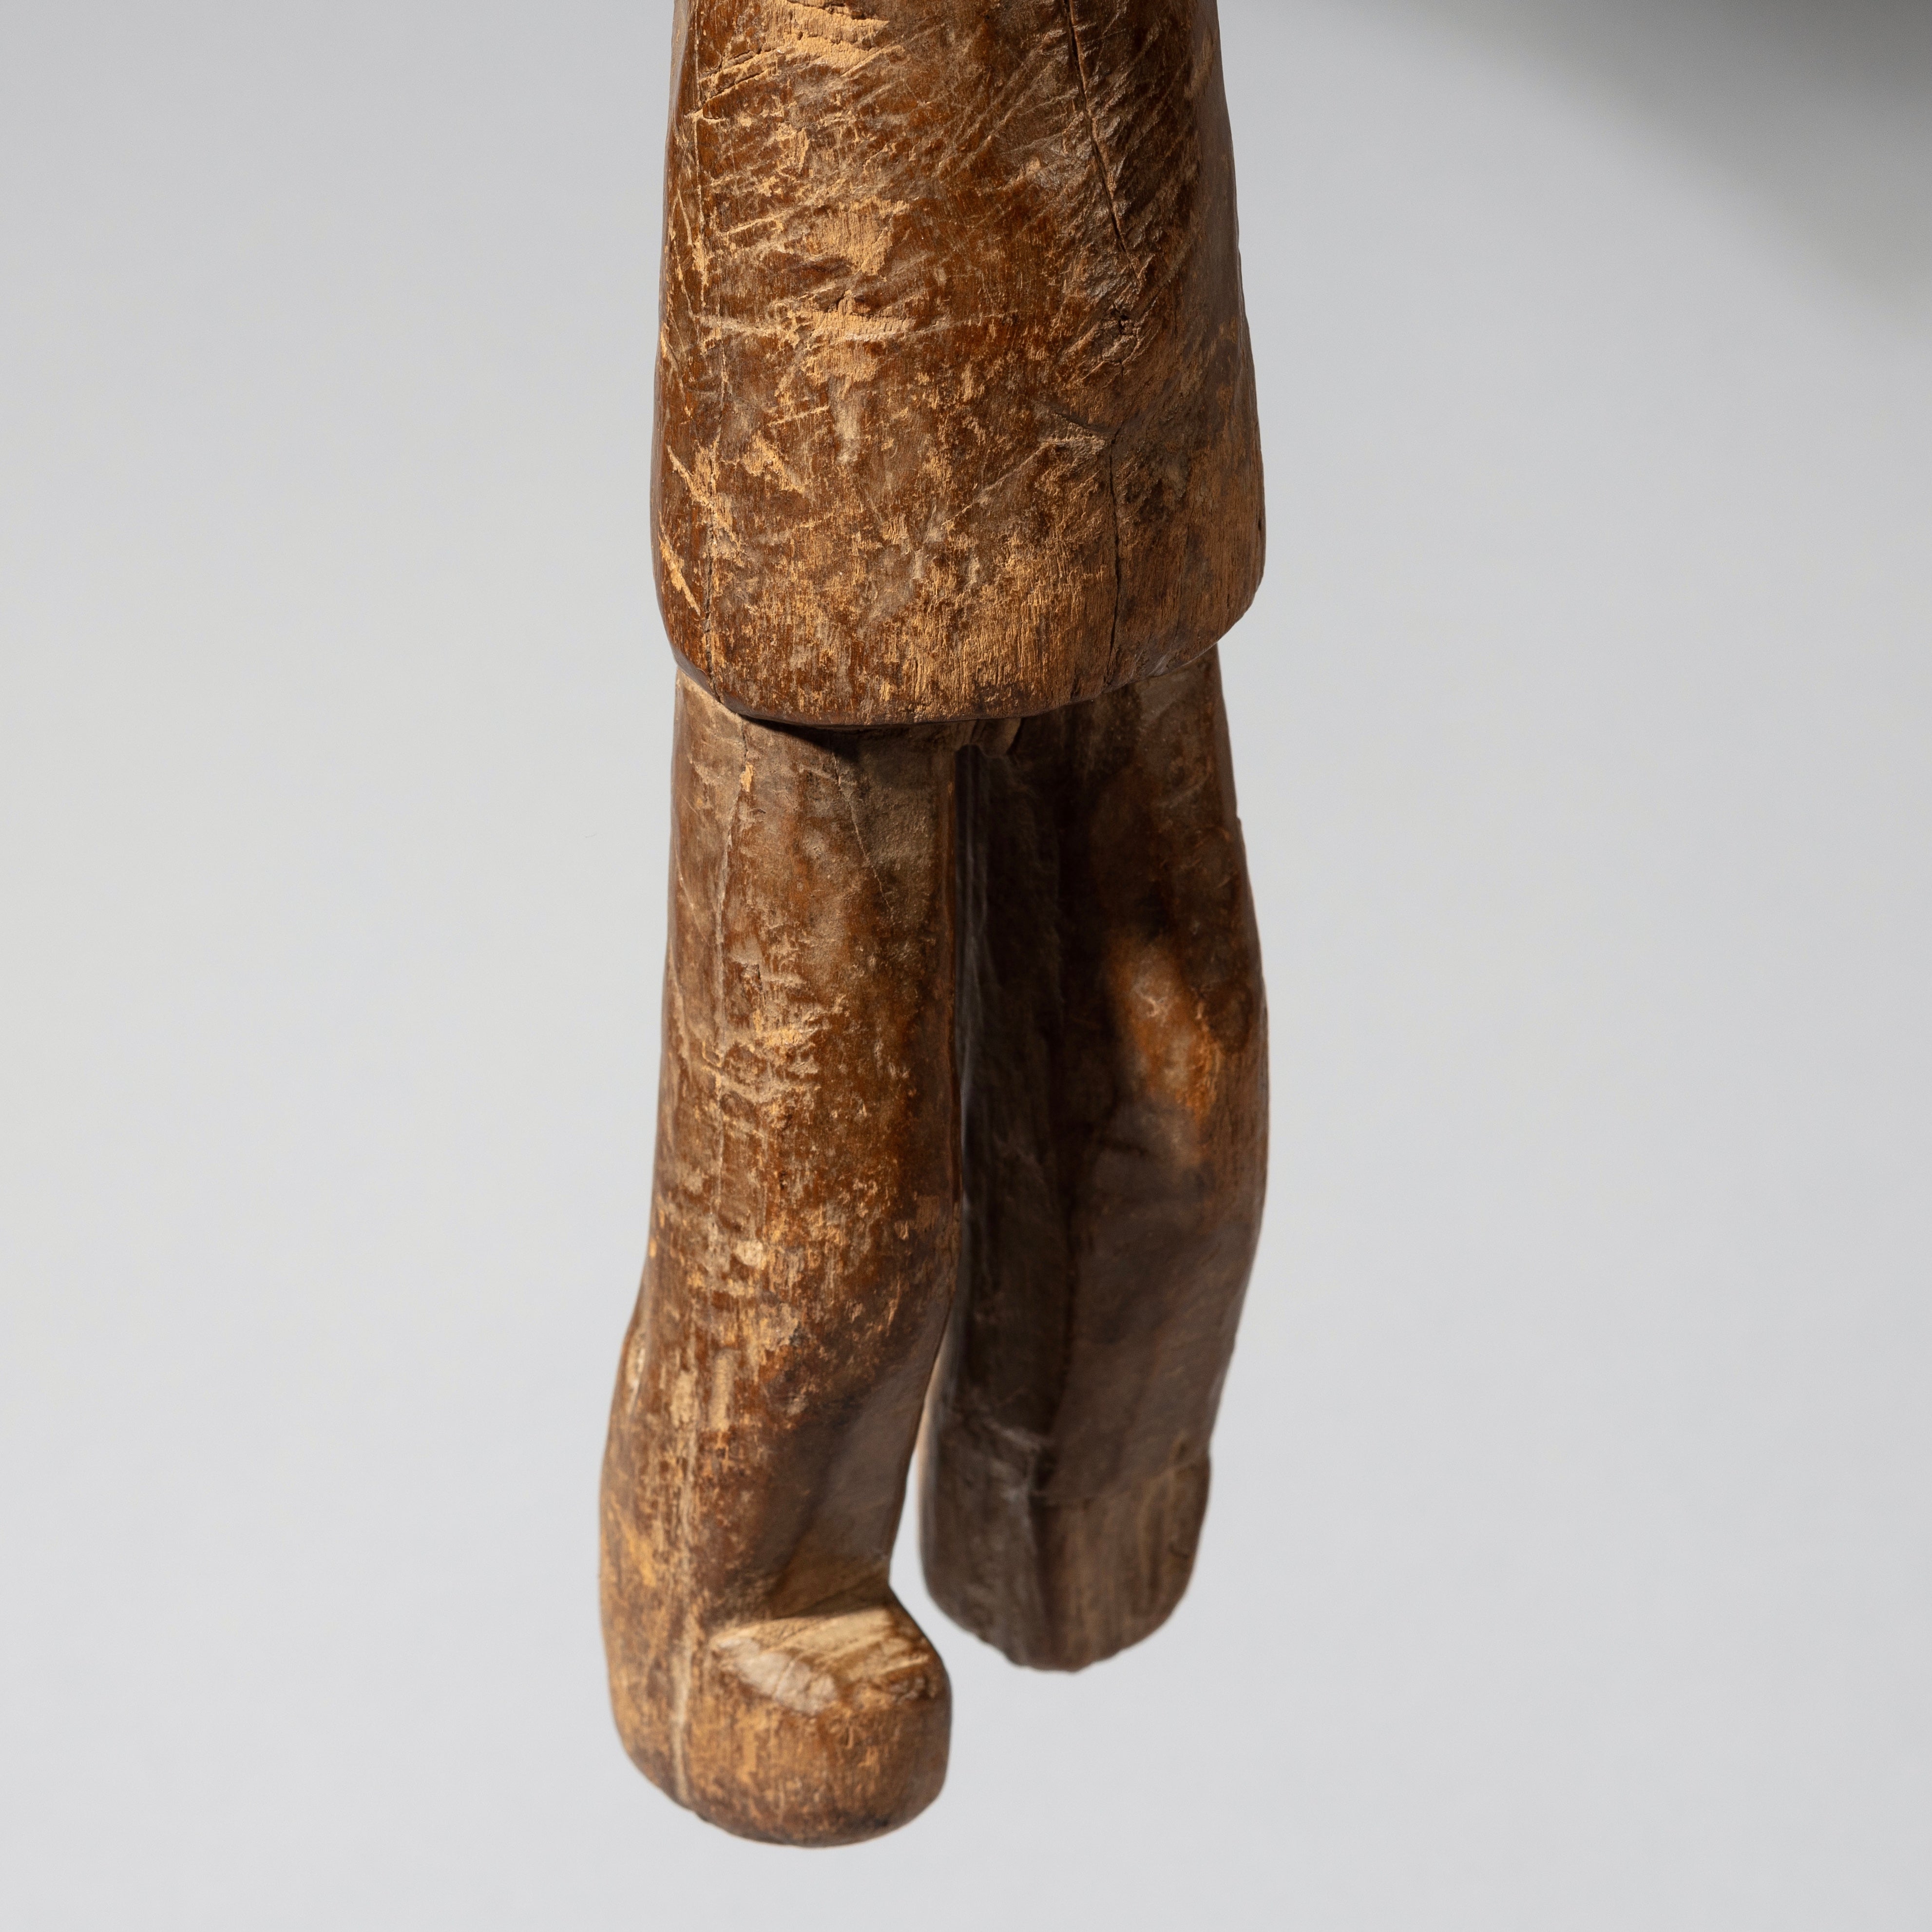 WELL USED MOSSI DOLL FROM BURKINA FASO ( No 1376)